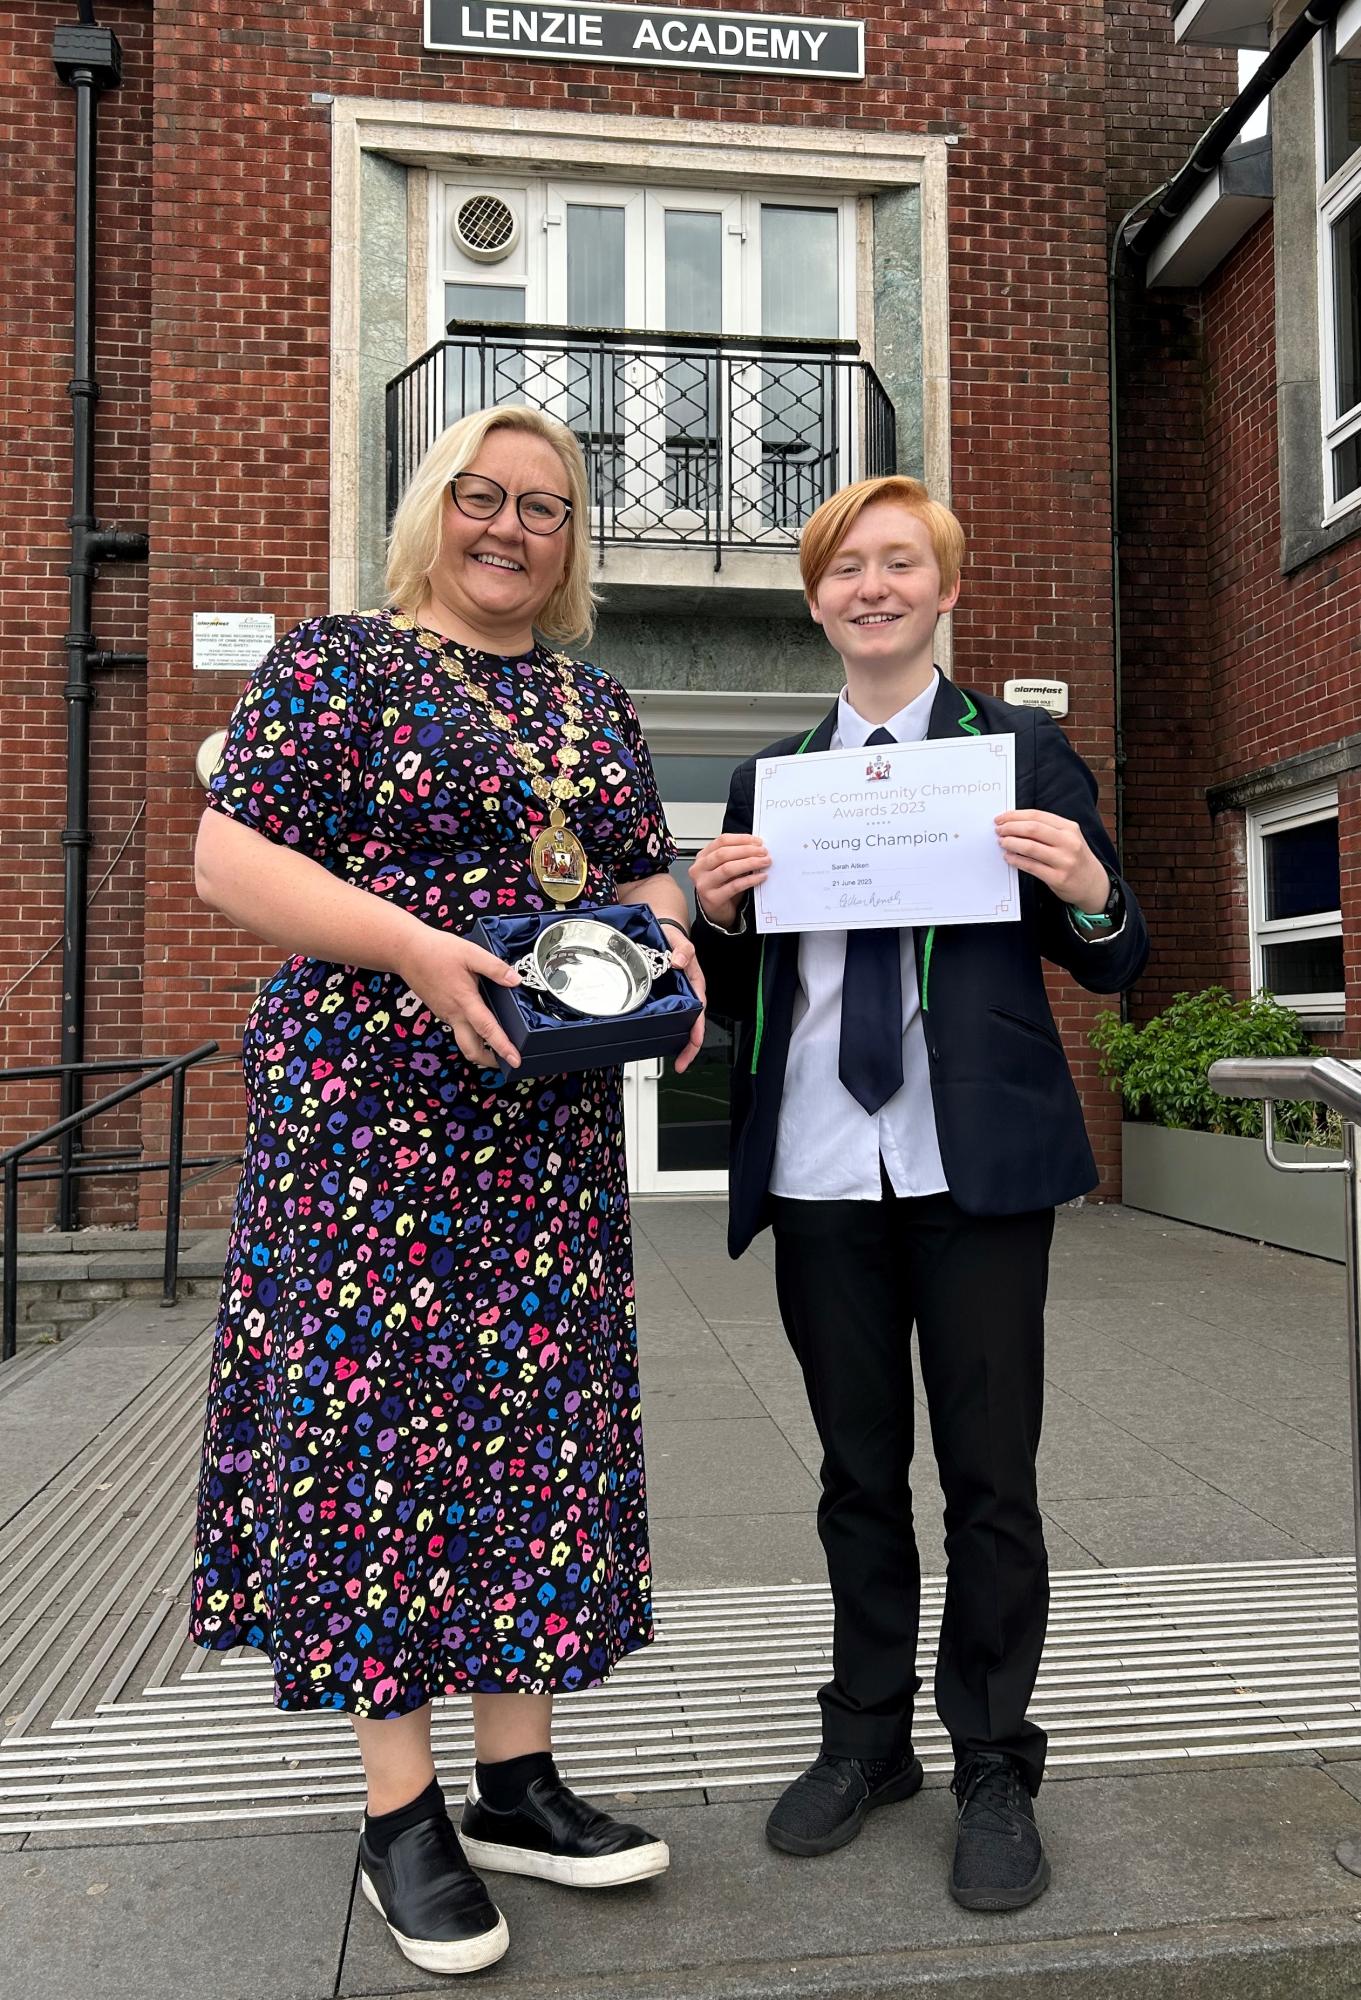 Provost Gillian Renwick with pupil Sarah Aitken holding the Young Champion award